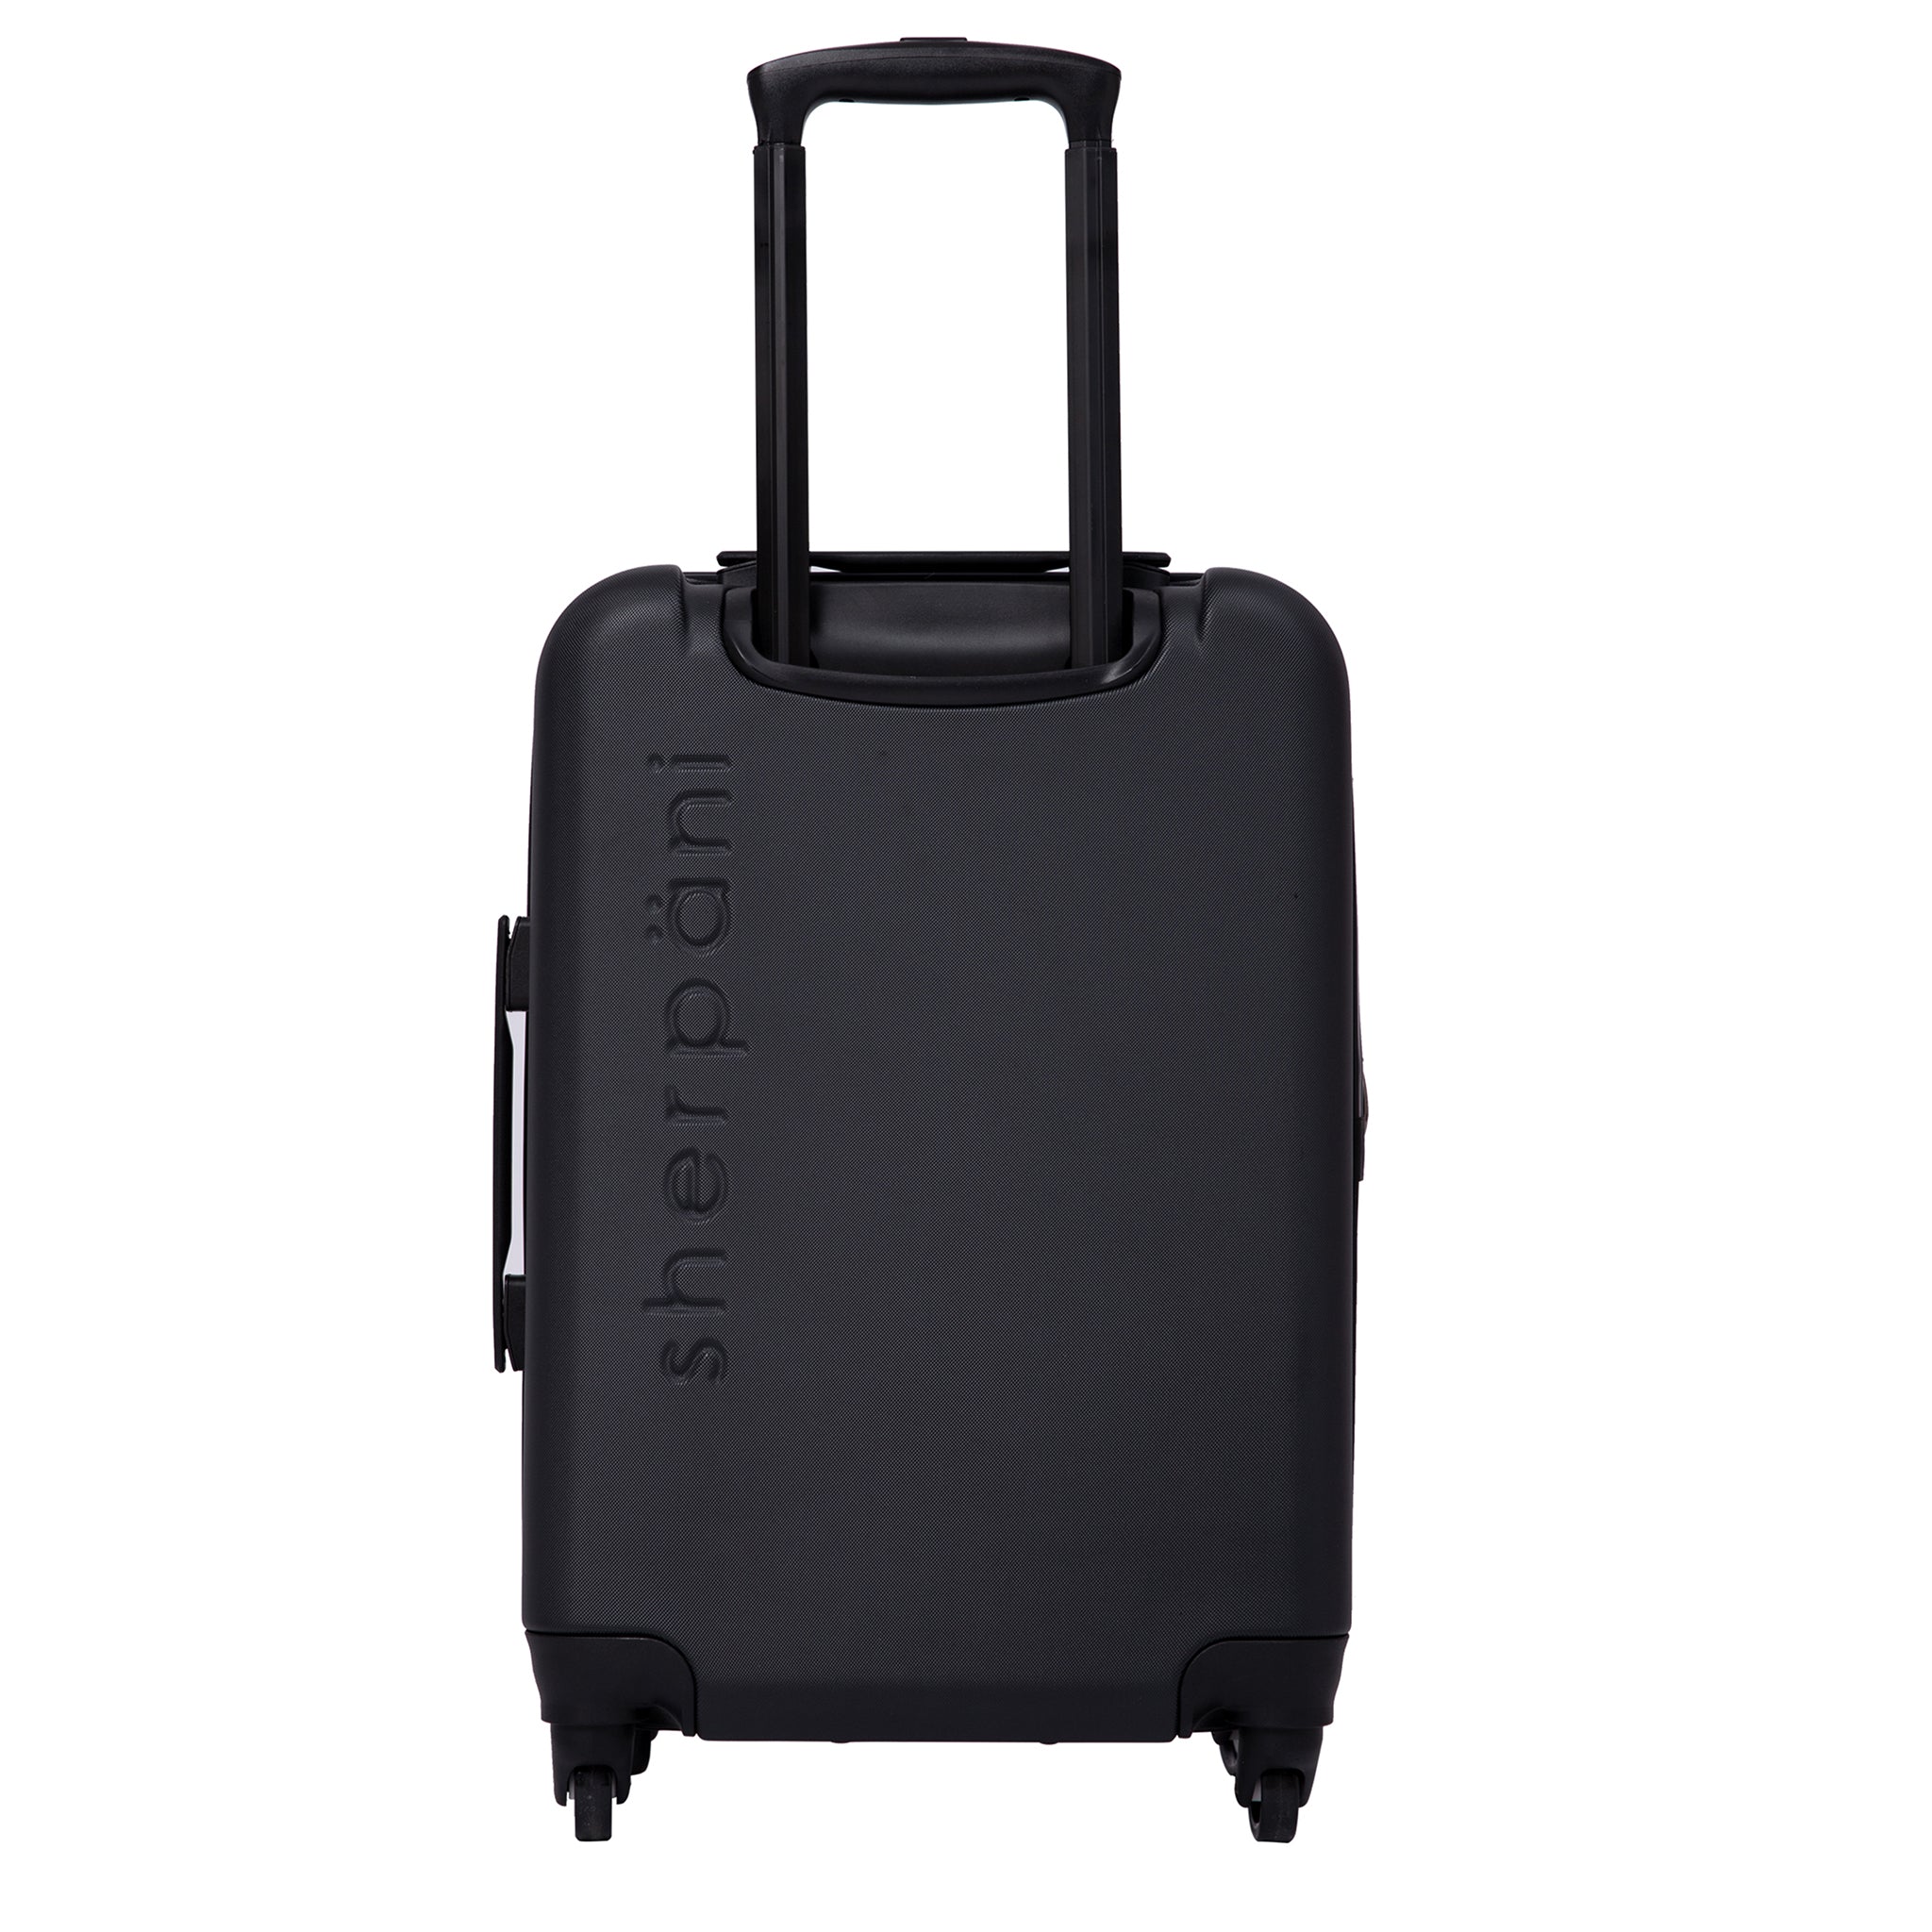 Back view of Sherpani hard shell luggage the Meridian. Part of Sherpani Travel Carry on Bundle in Classic Black. 